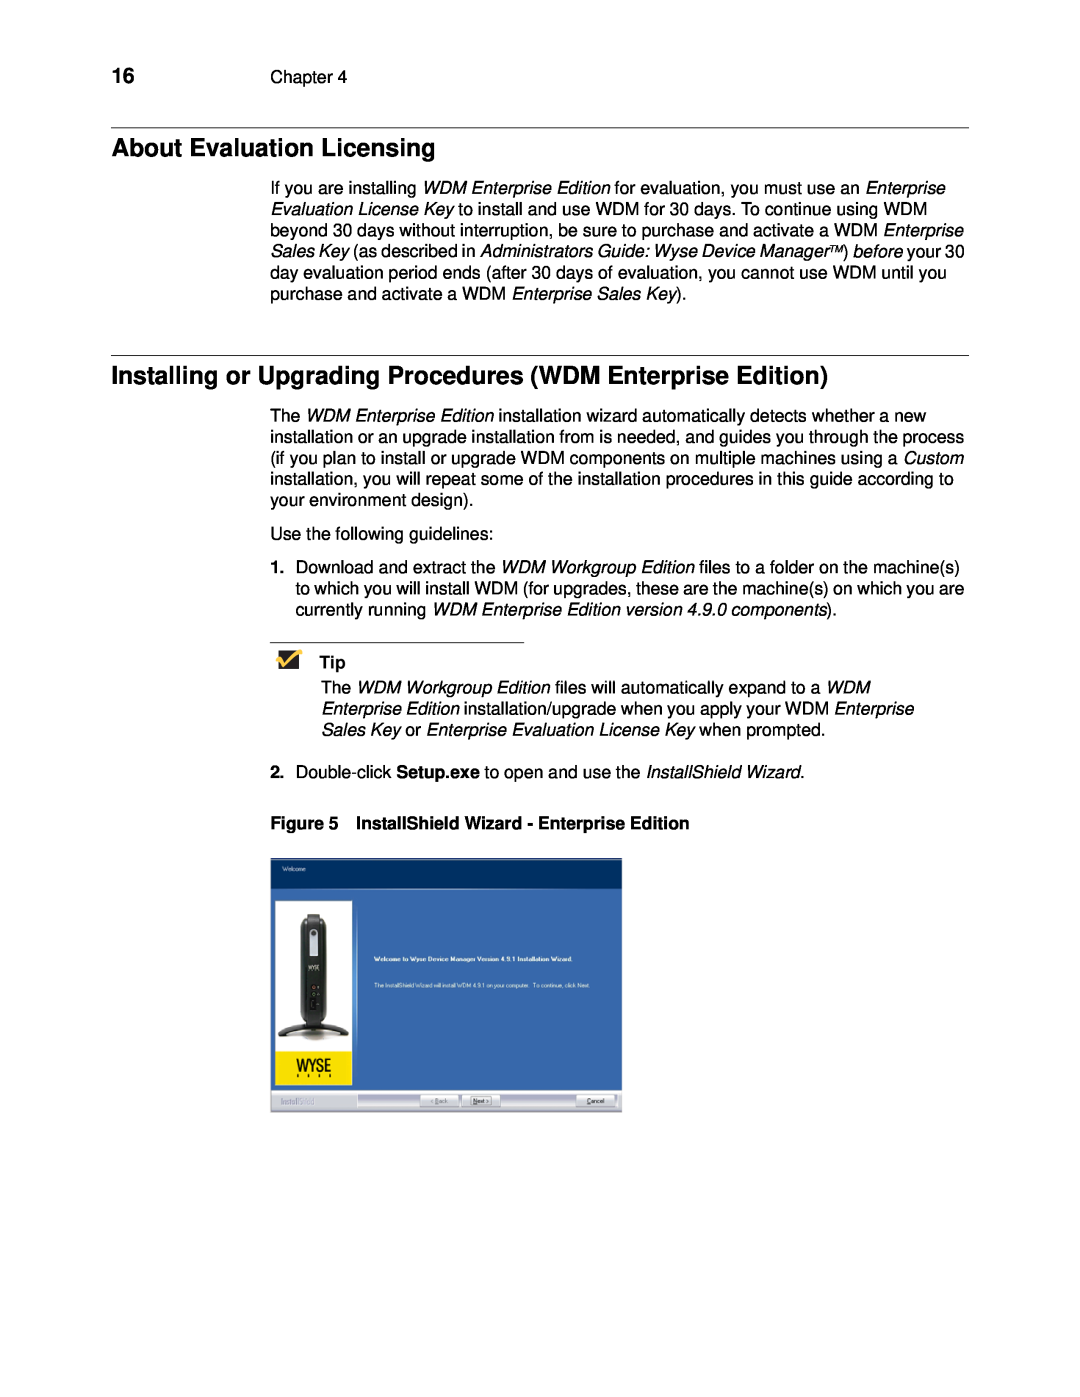 Wyse Technology 883886-01 manual About Evaluation Licensing, Installing or Upgrading Procedures WDM Enterprise Edition 